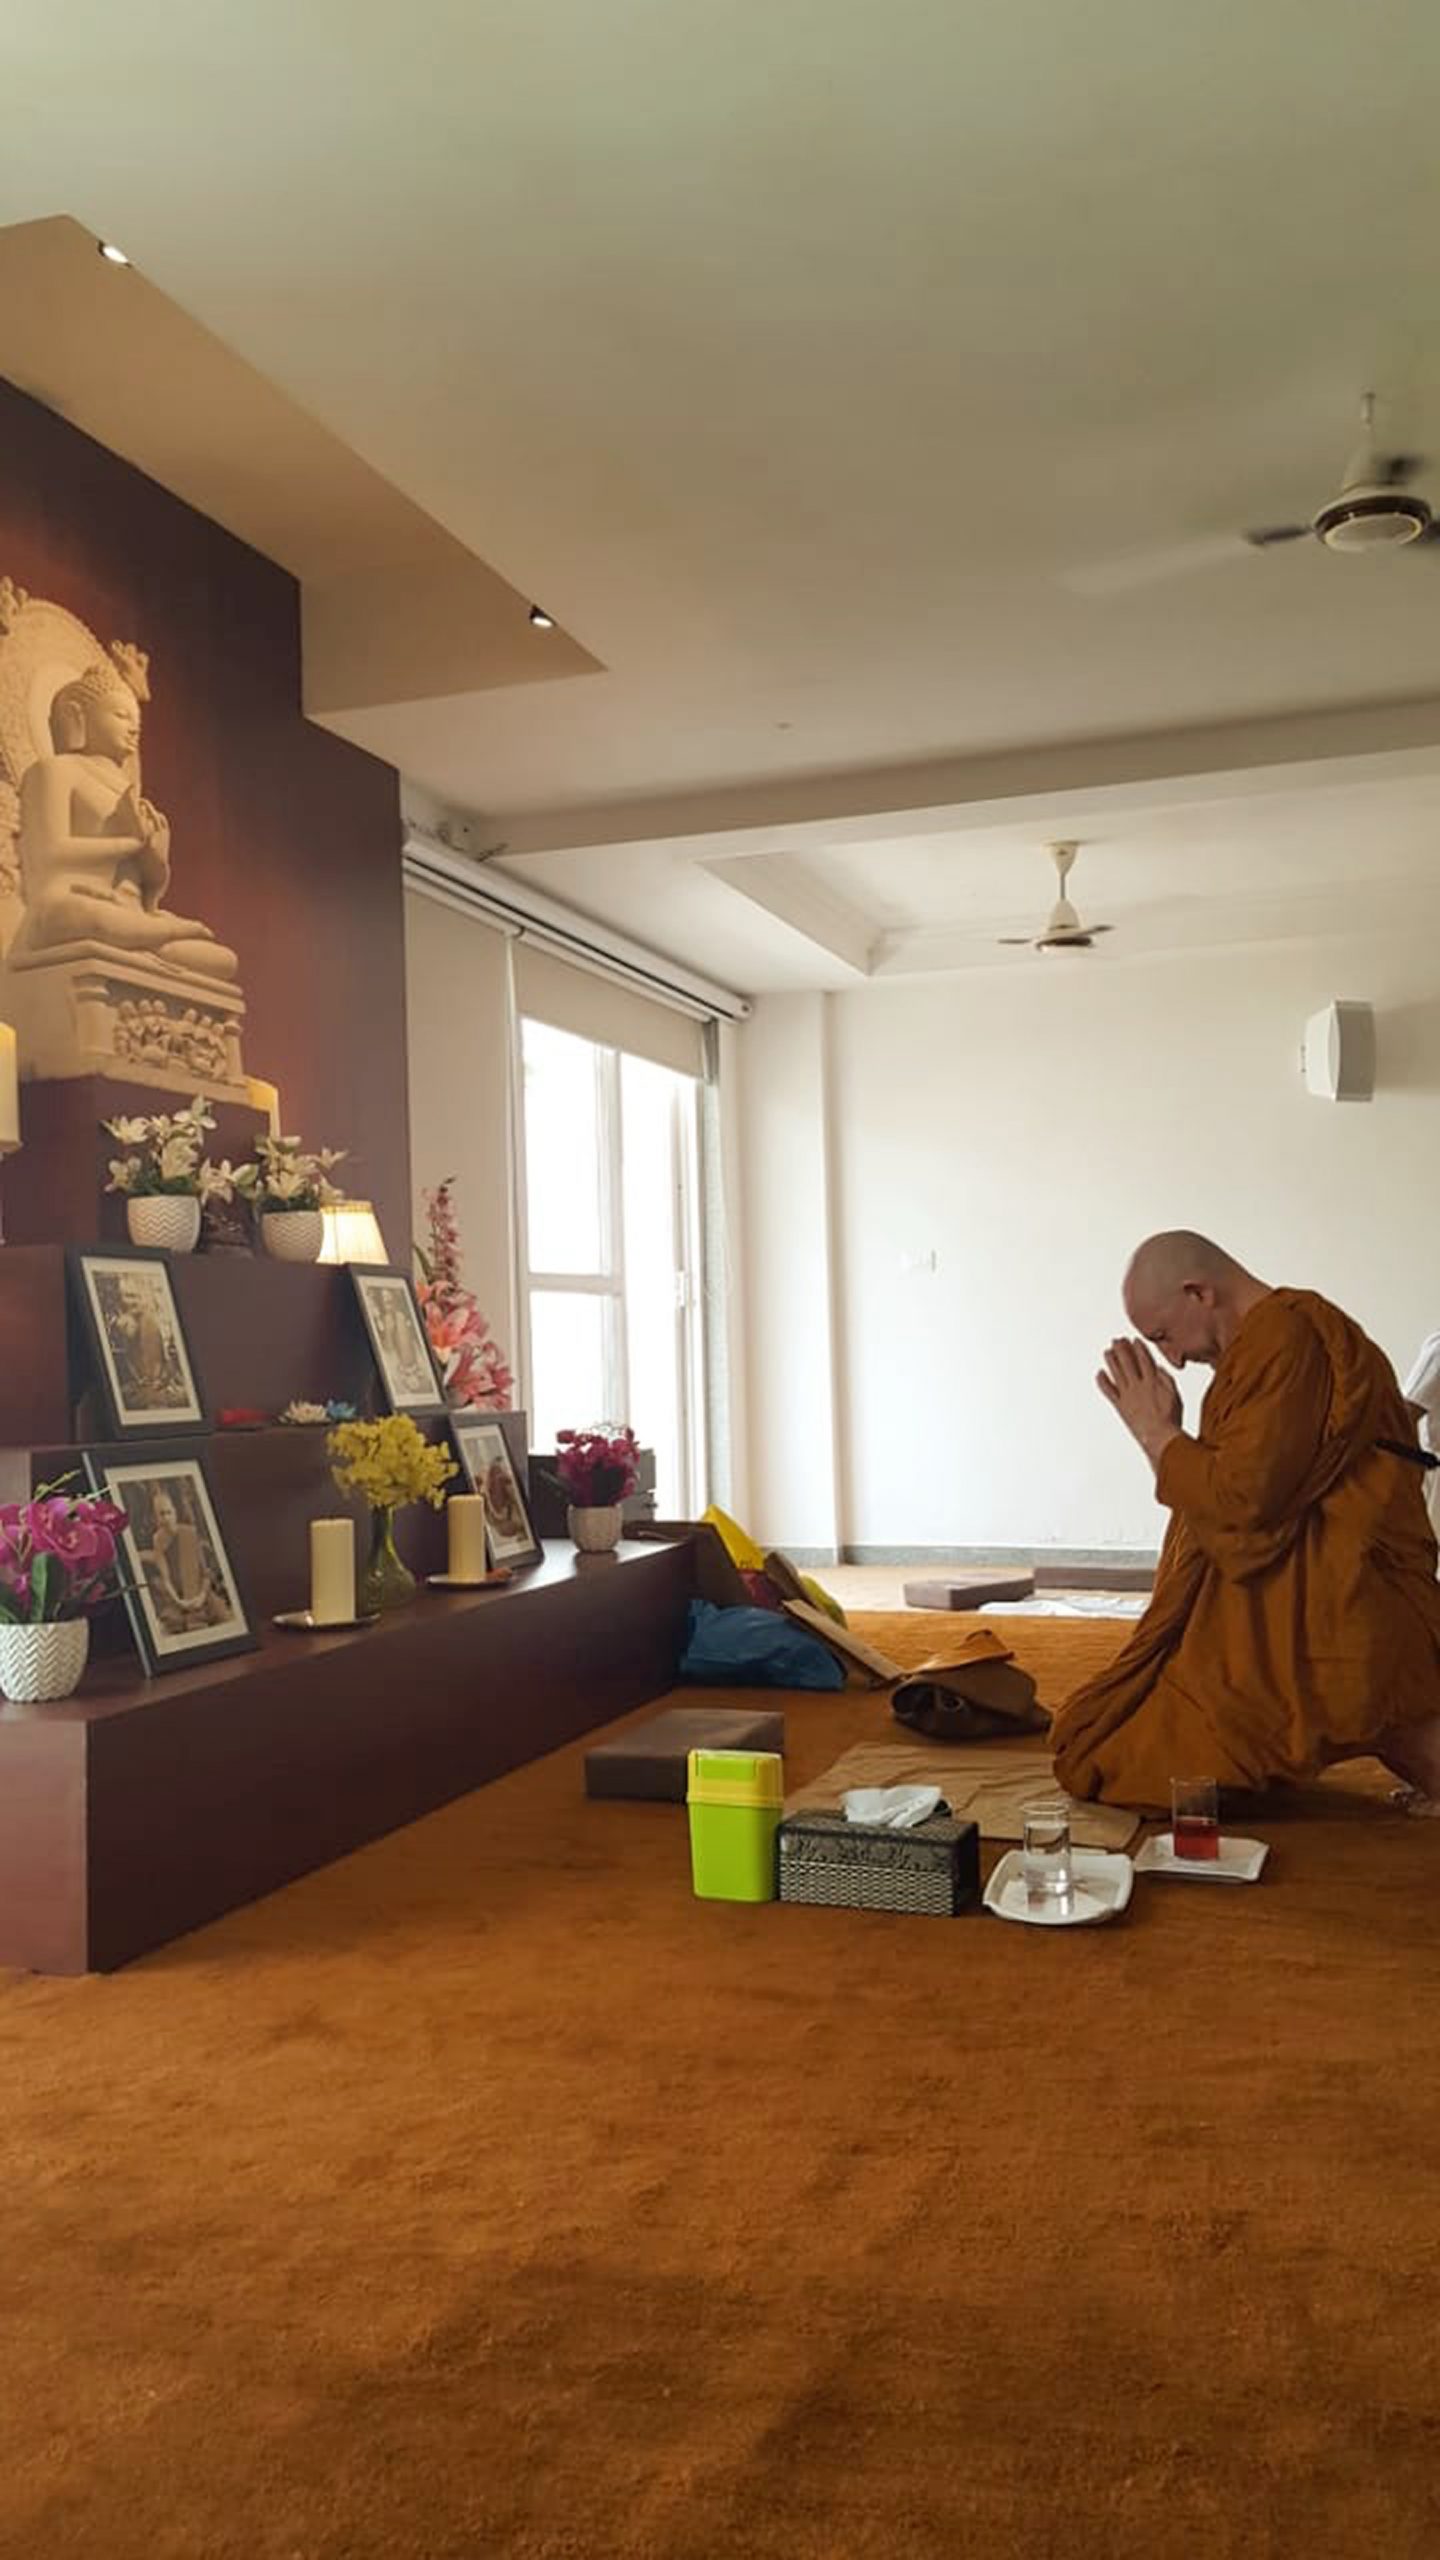 A Buddhist man prays on his knees in front of an altar